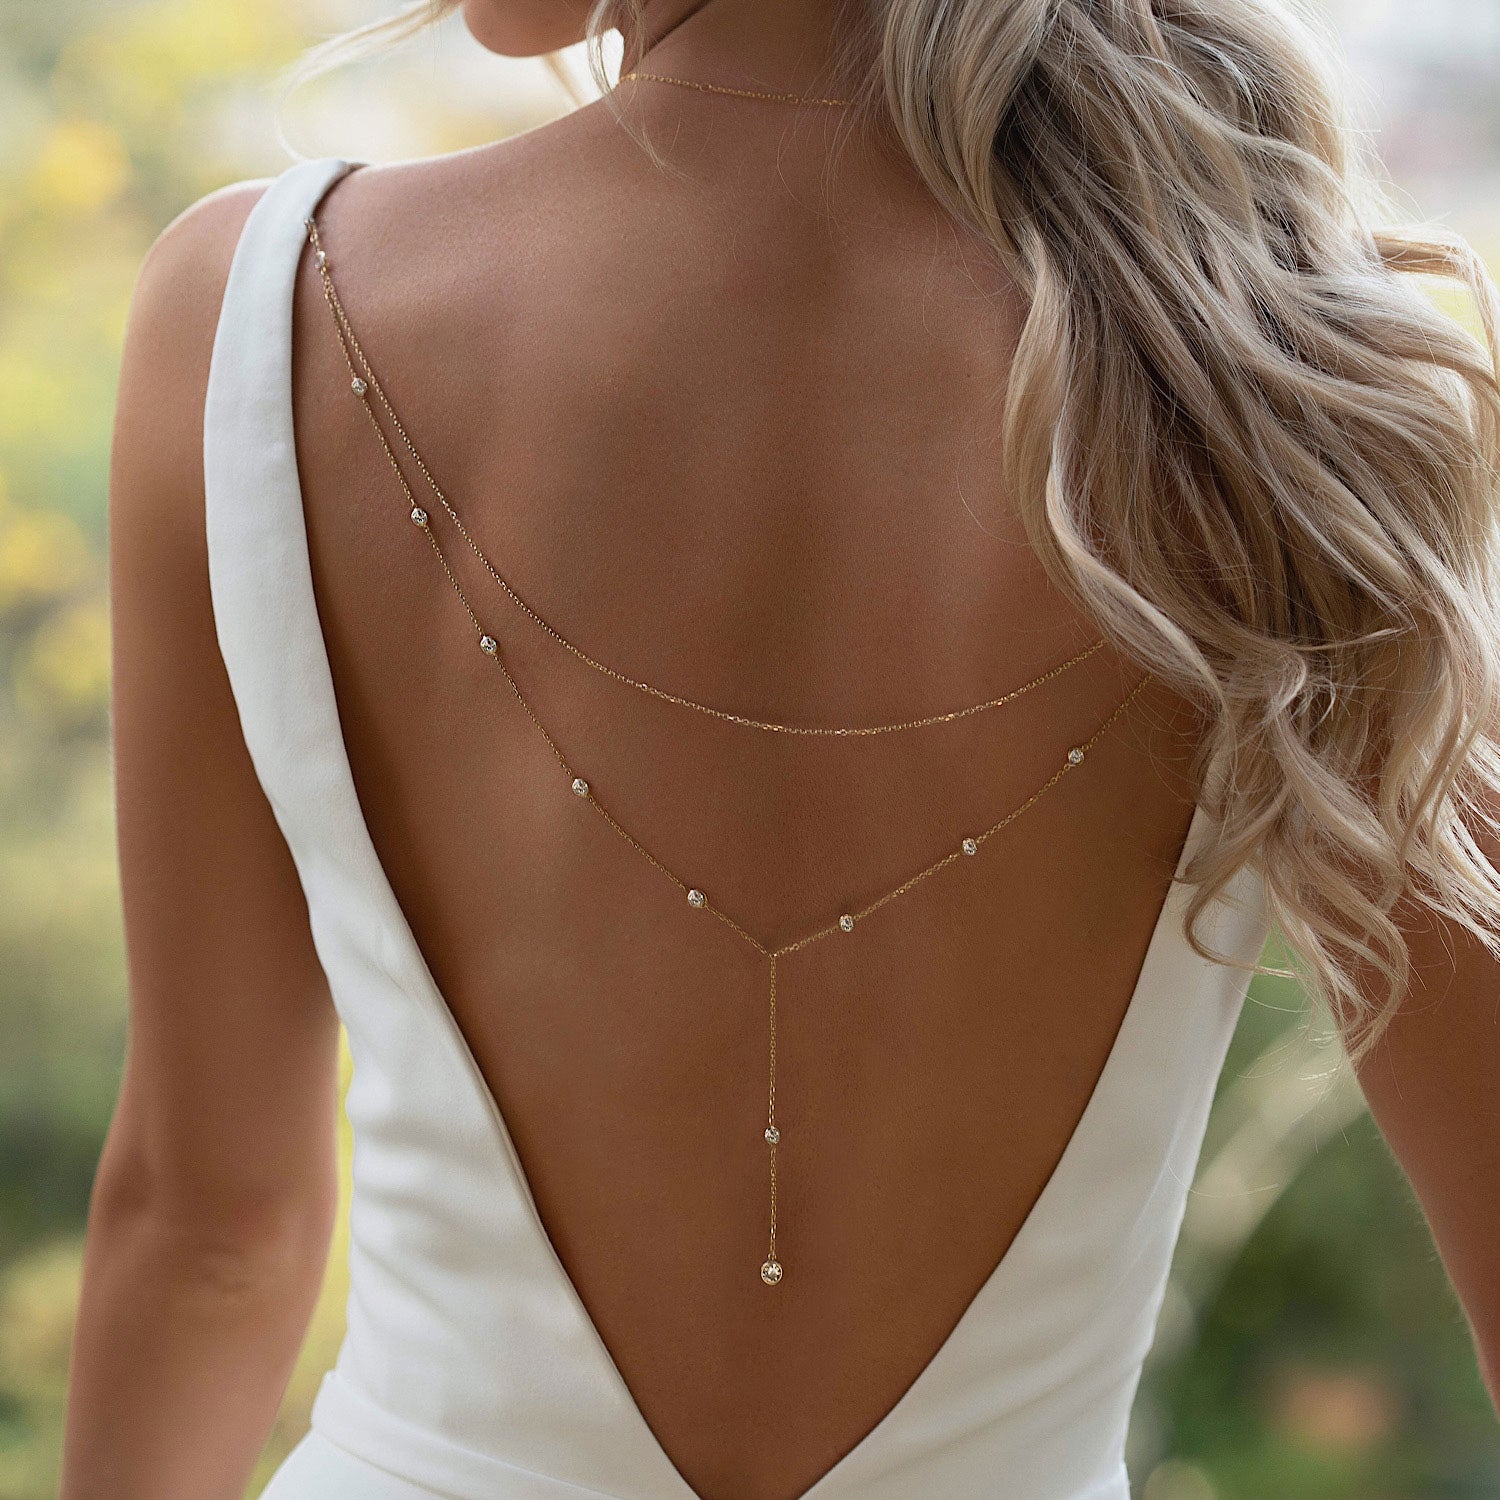 The Complete Guide to Bridal Jewelry Styles, Based on Your Wedding Gown  Neckline - Wedded Wonderland